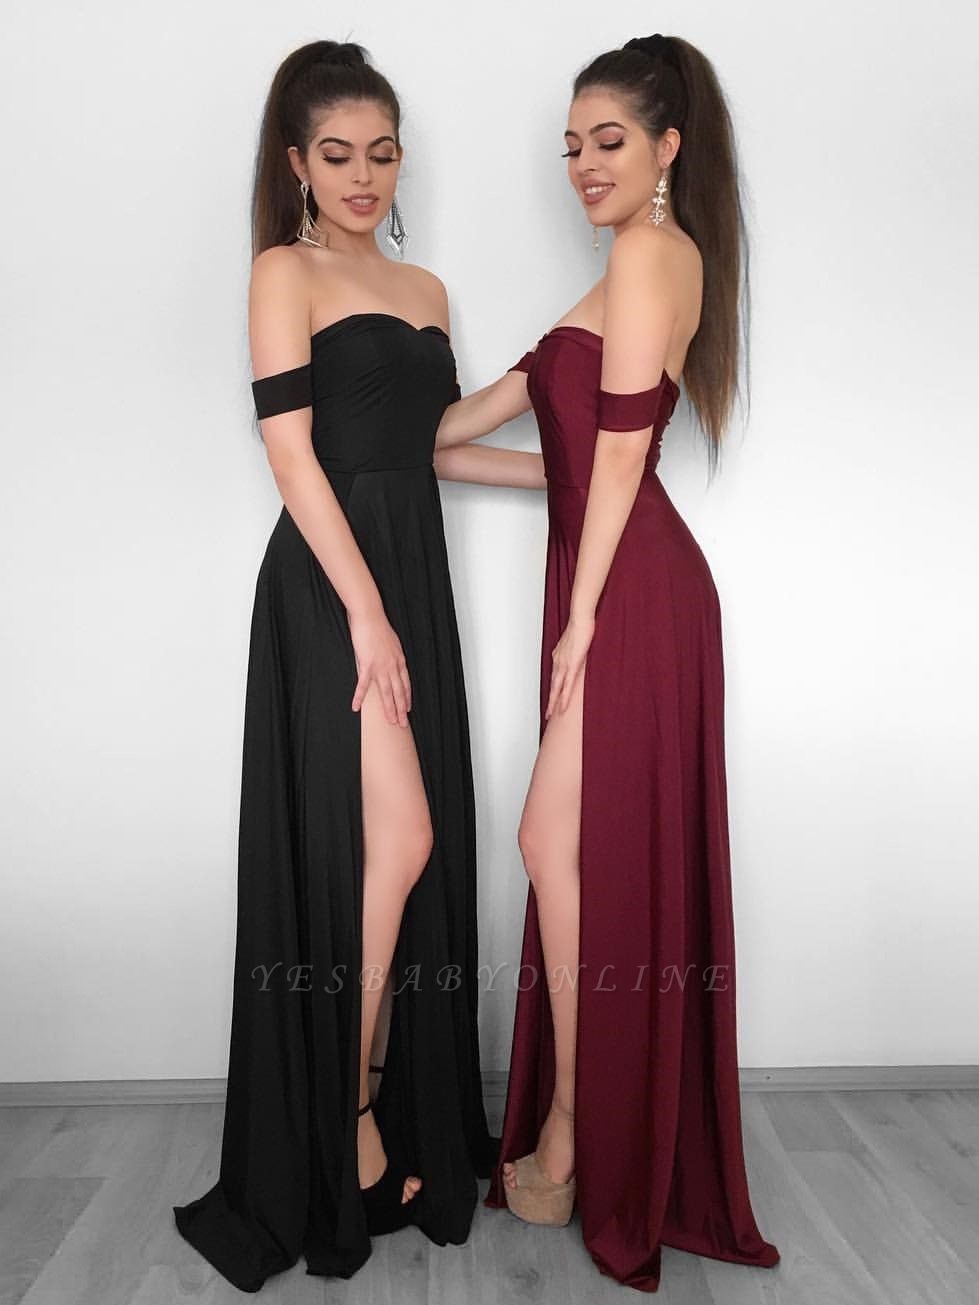 Sexy High Slit Evening Gowns | Off-the ...